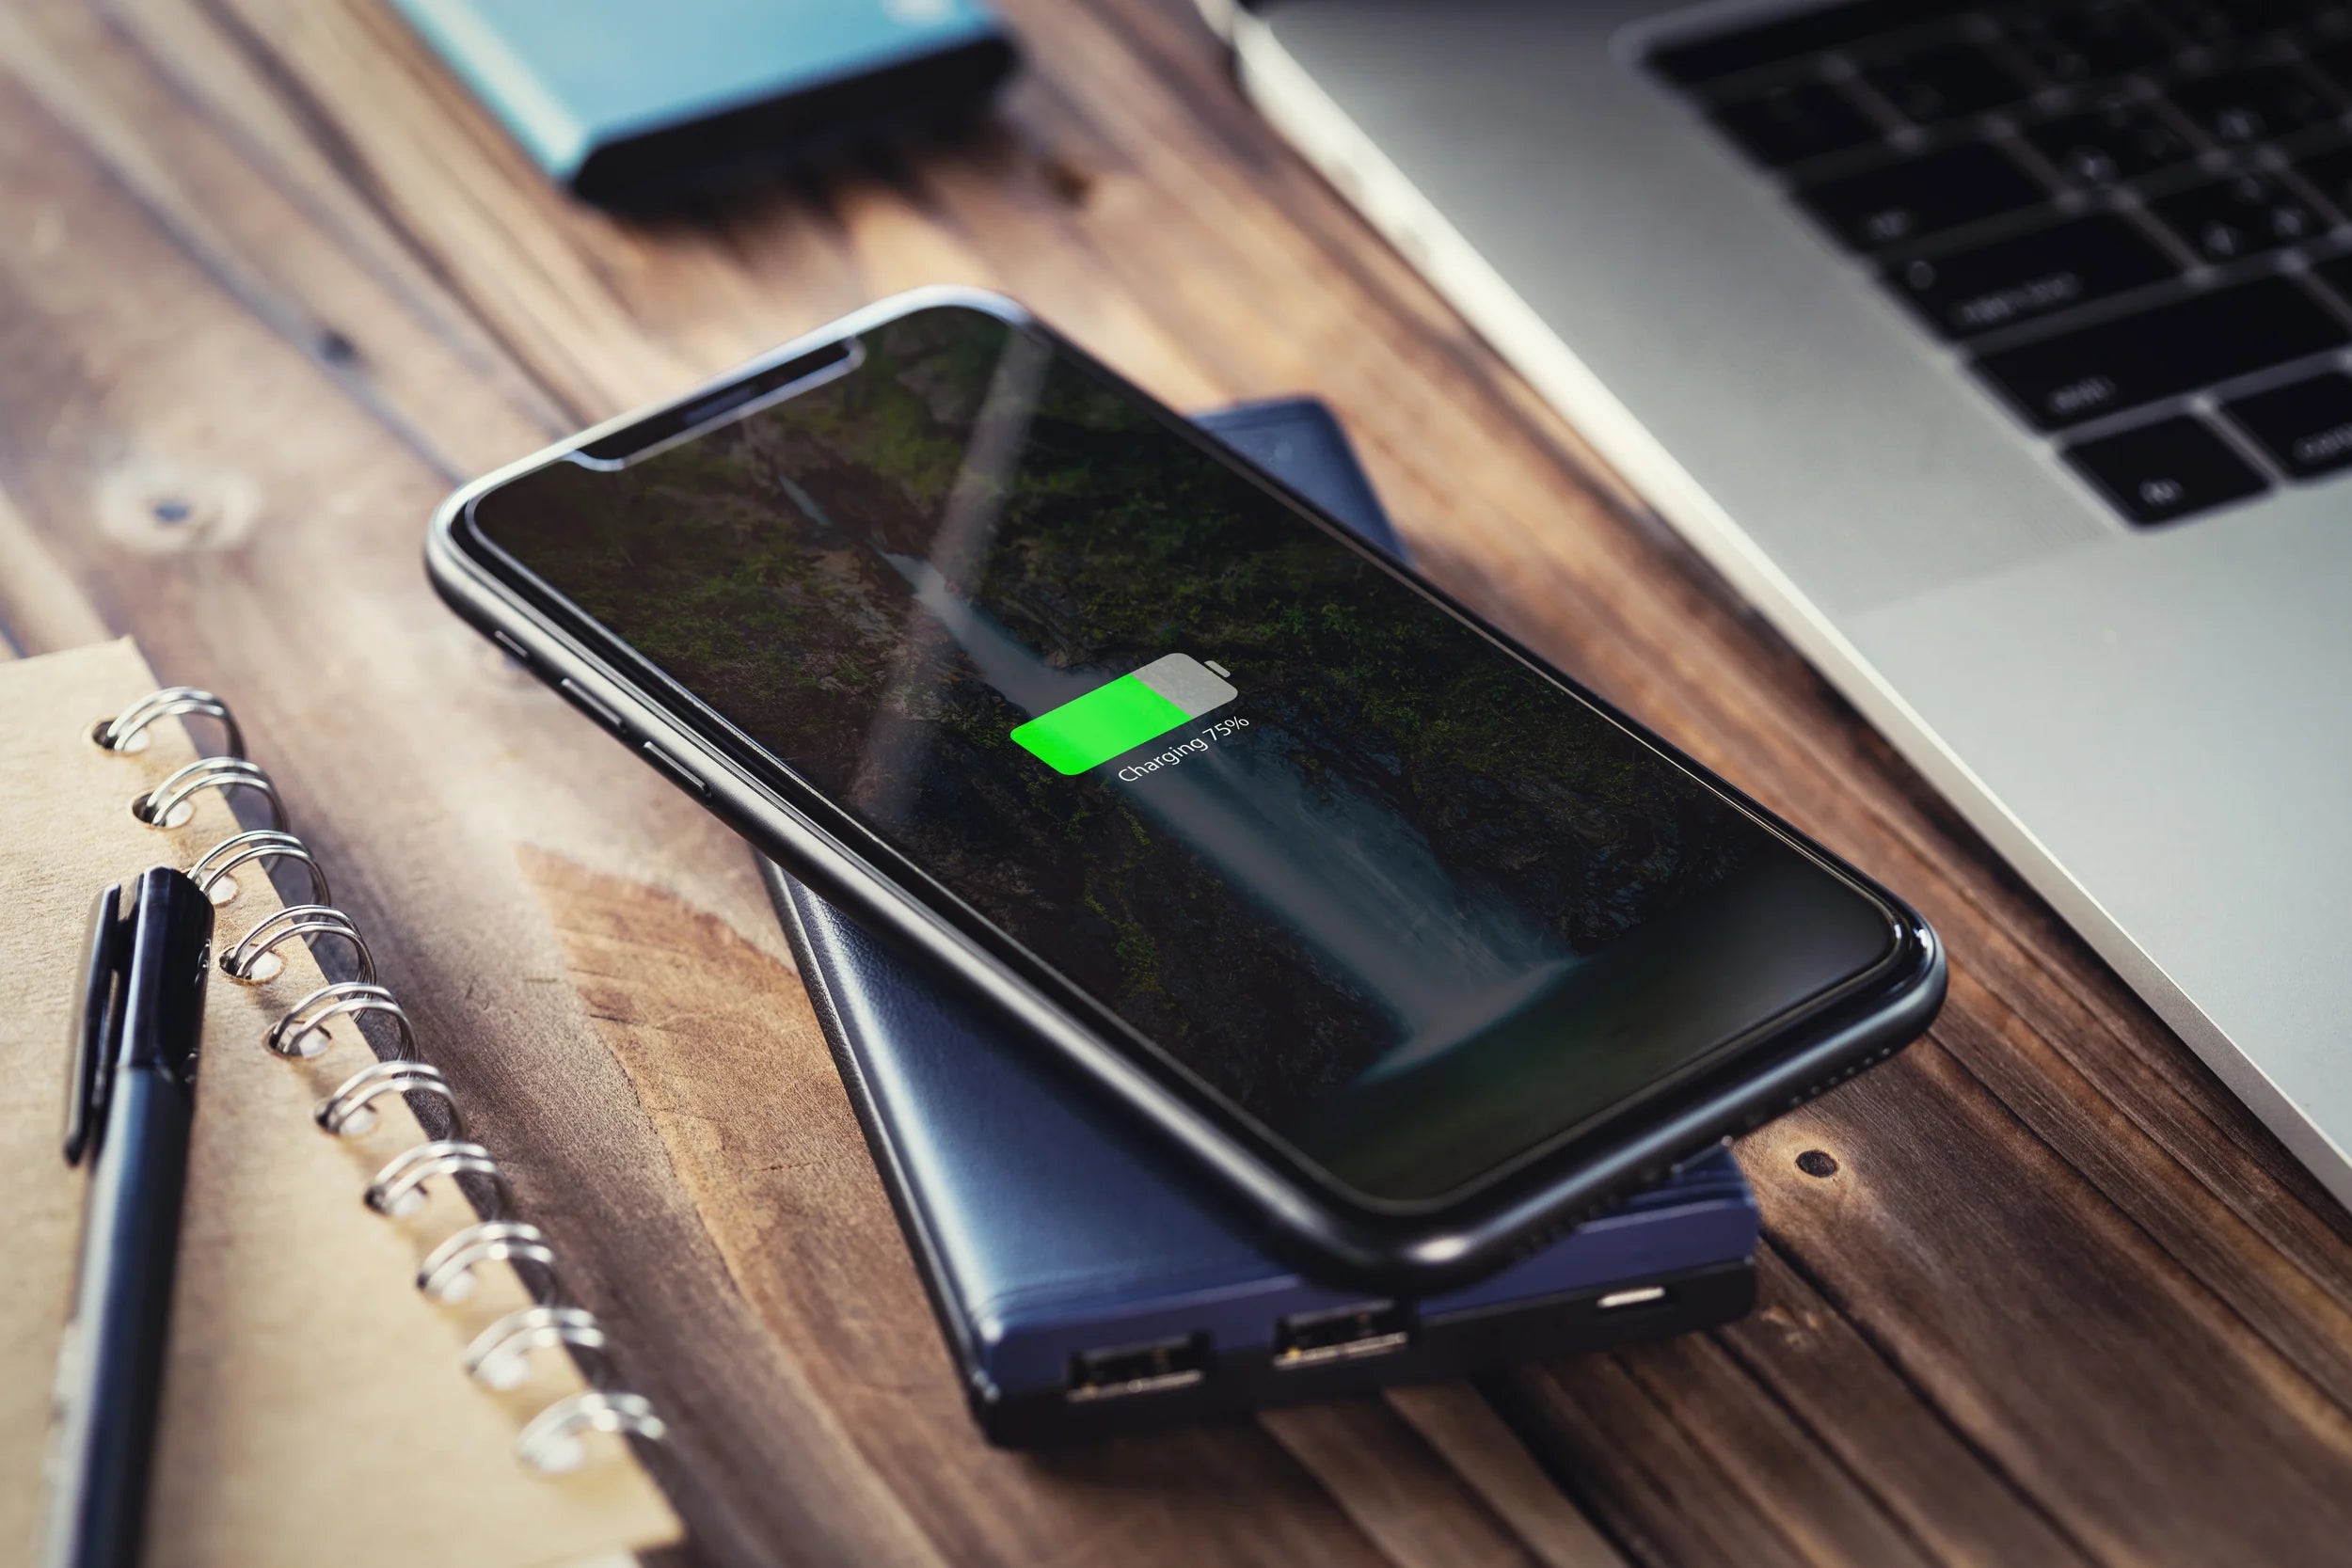 Getting a Portable Power Bank With Wireless Charging Capabilities